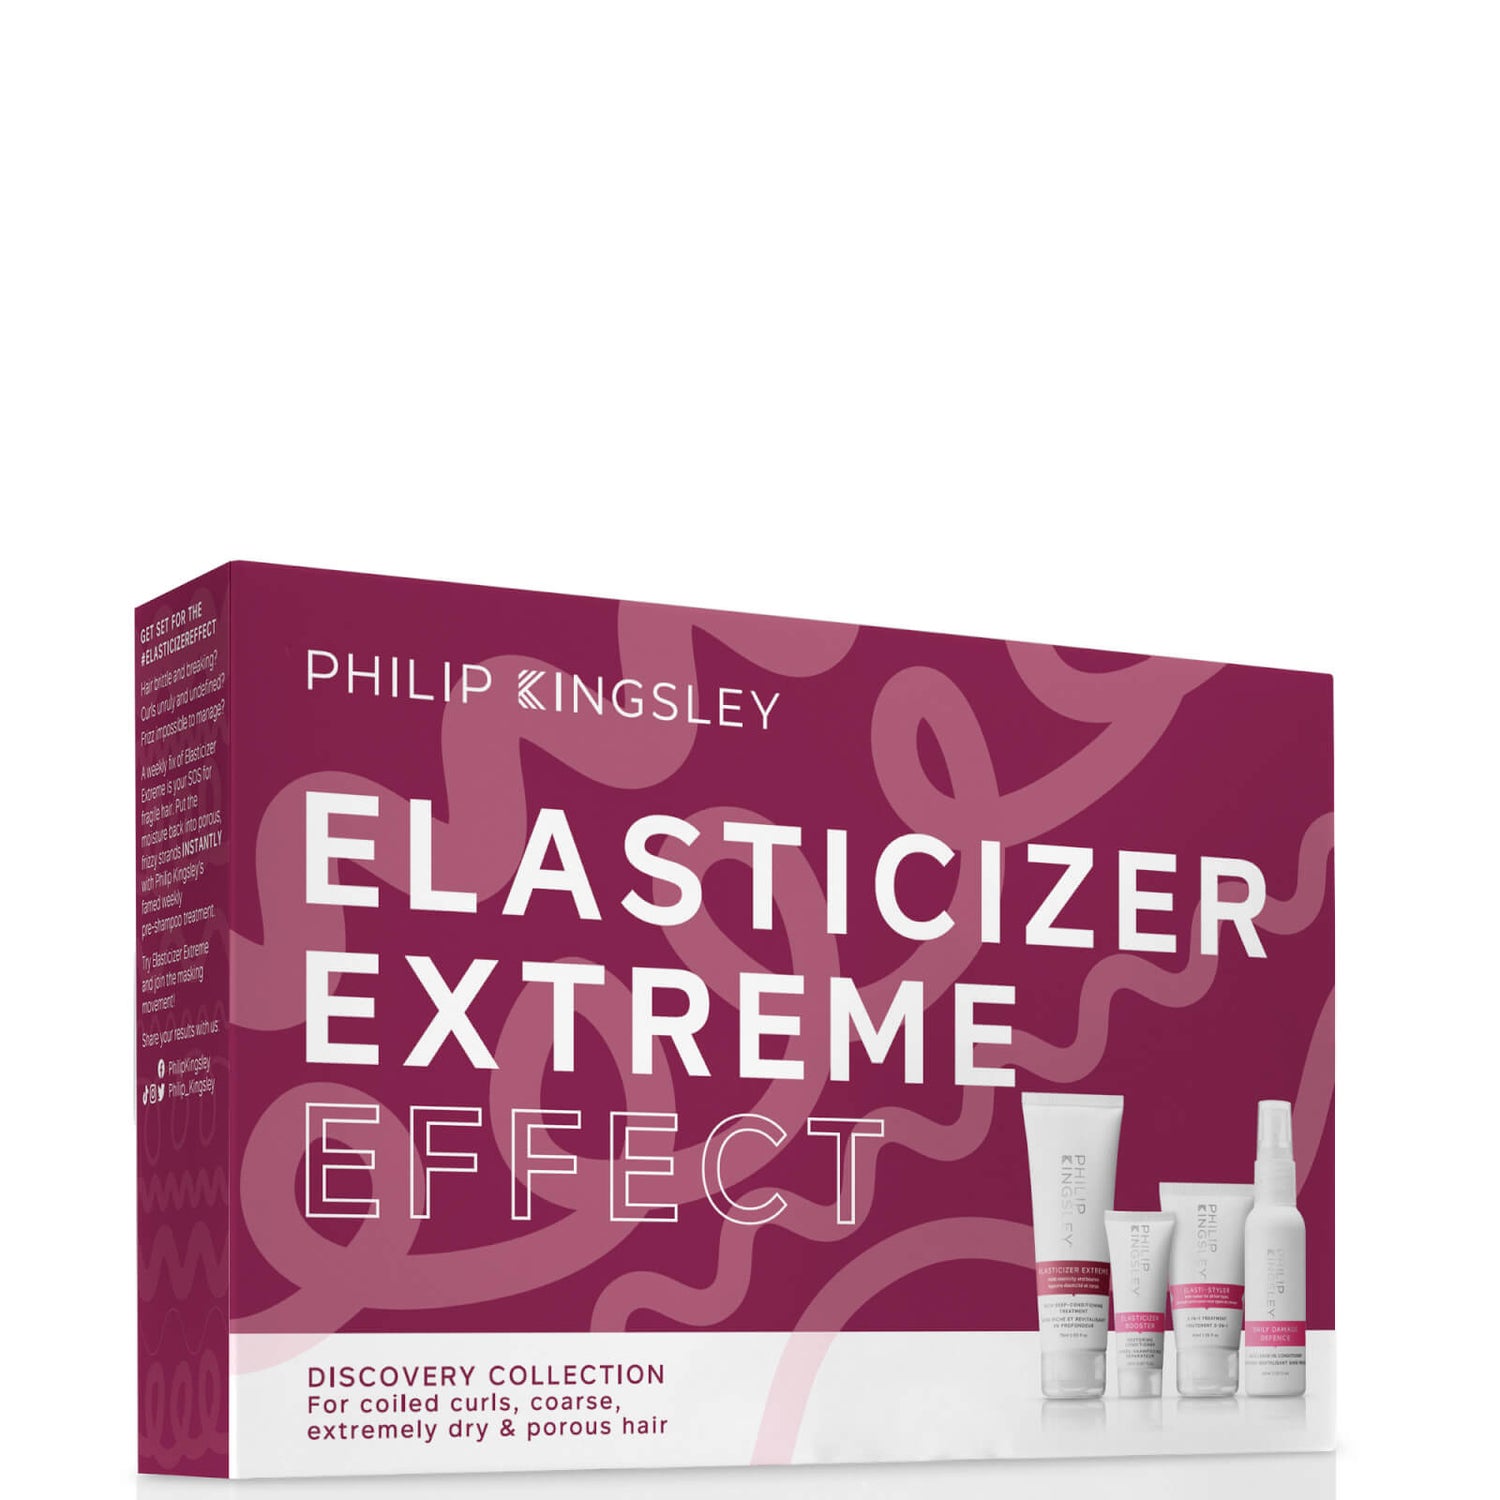 Philip Kingsley Elasticizer Extreme Effects Discovery Collection (Worth £43.50)